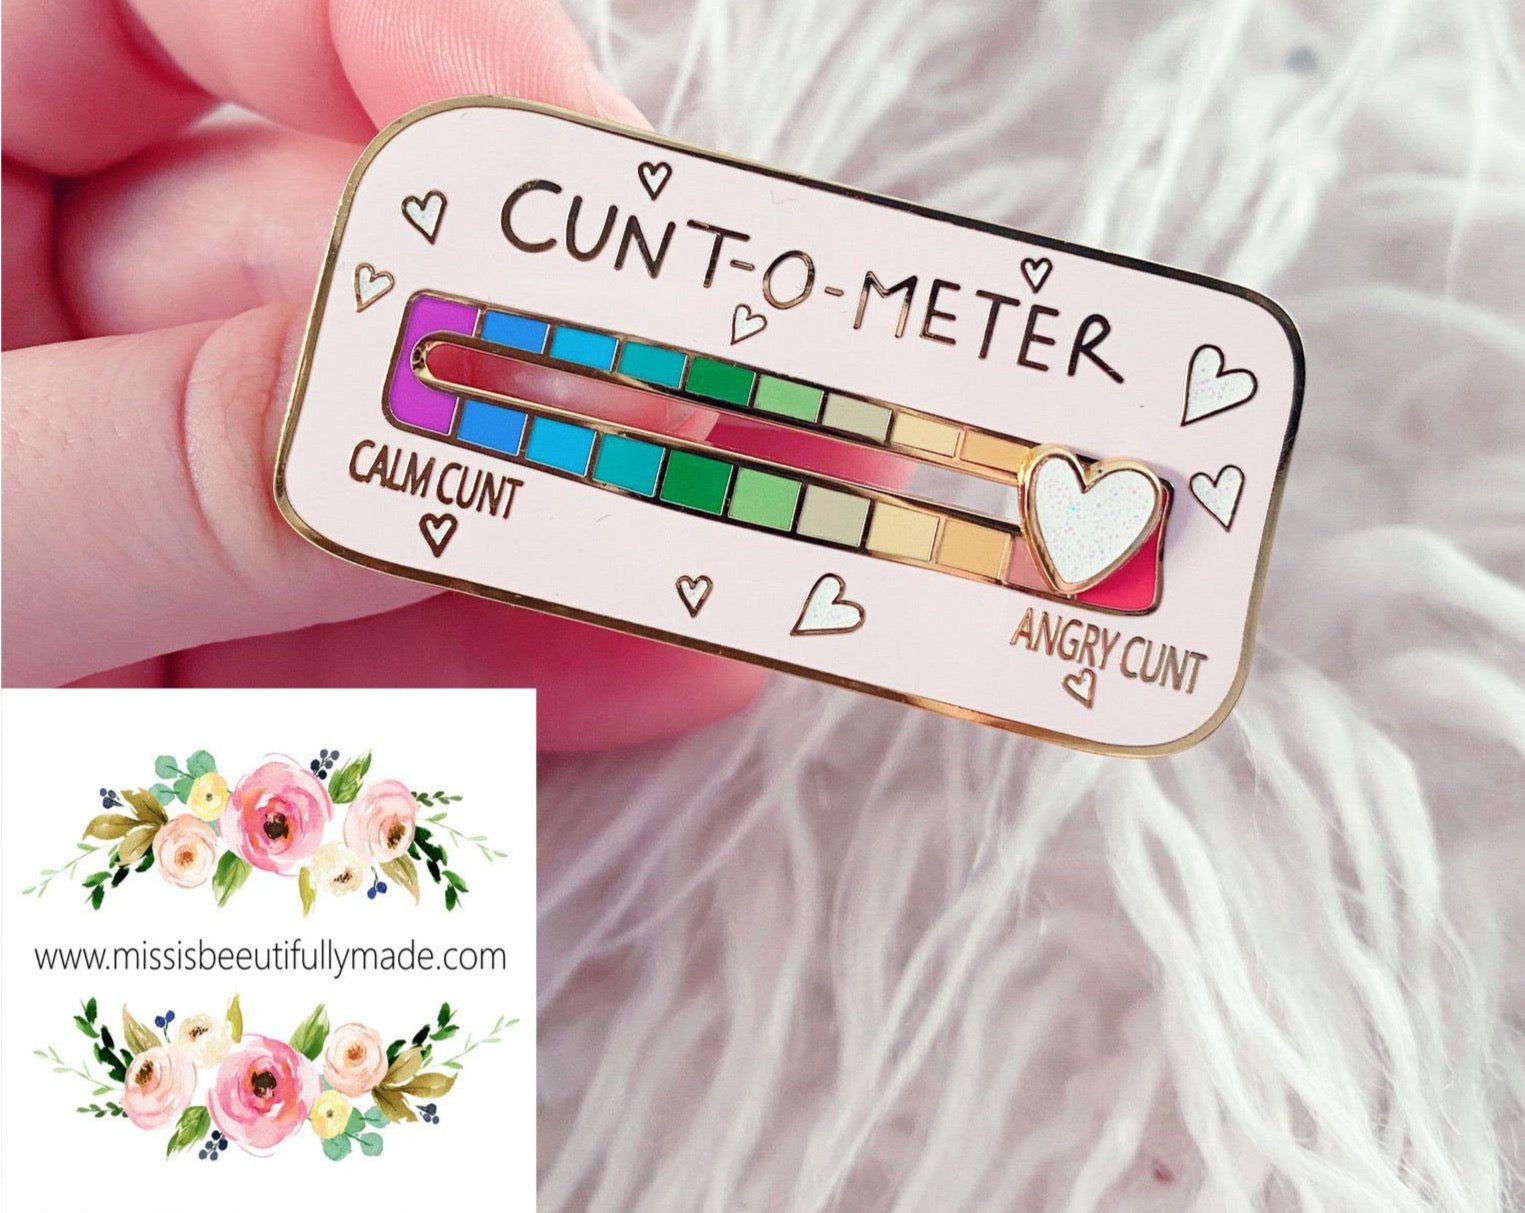 Gold enamel cunt-o-meter pin badge with a white glittery sliding heart. Slide from calm cunt to angry cunt with this funny interactive pin badge with pretty pastel rainbow colours.